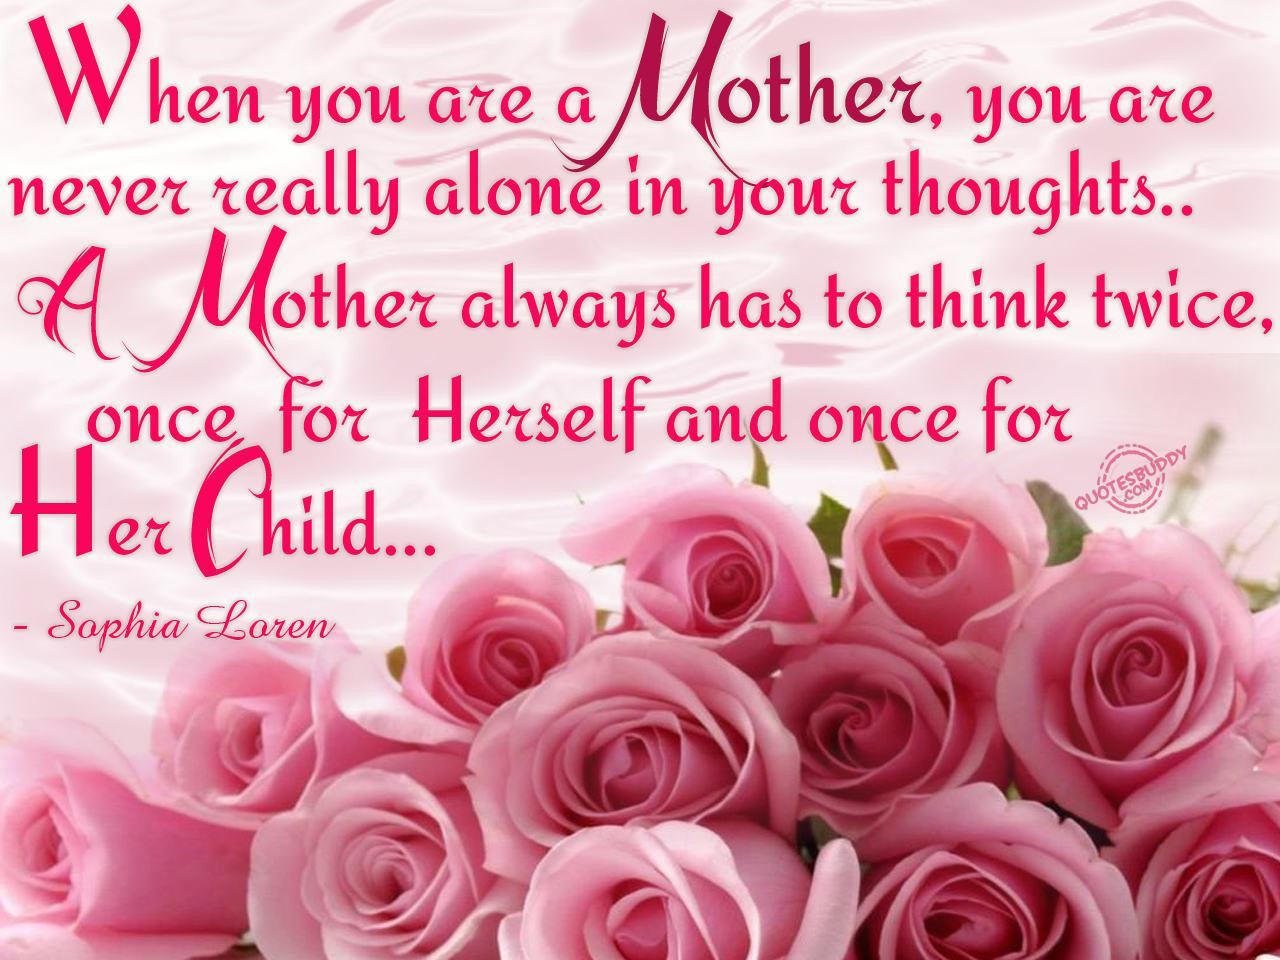 Quote On Mothers And Daughters
 Mama In Spanish Quotes QuotesGram